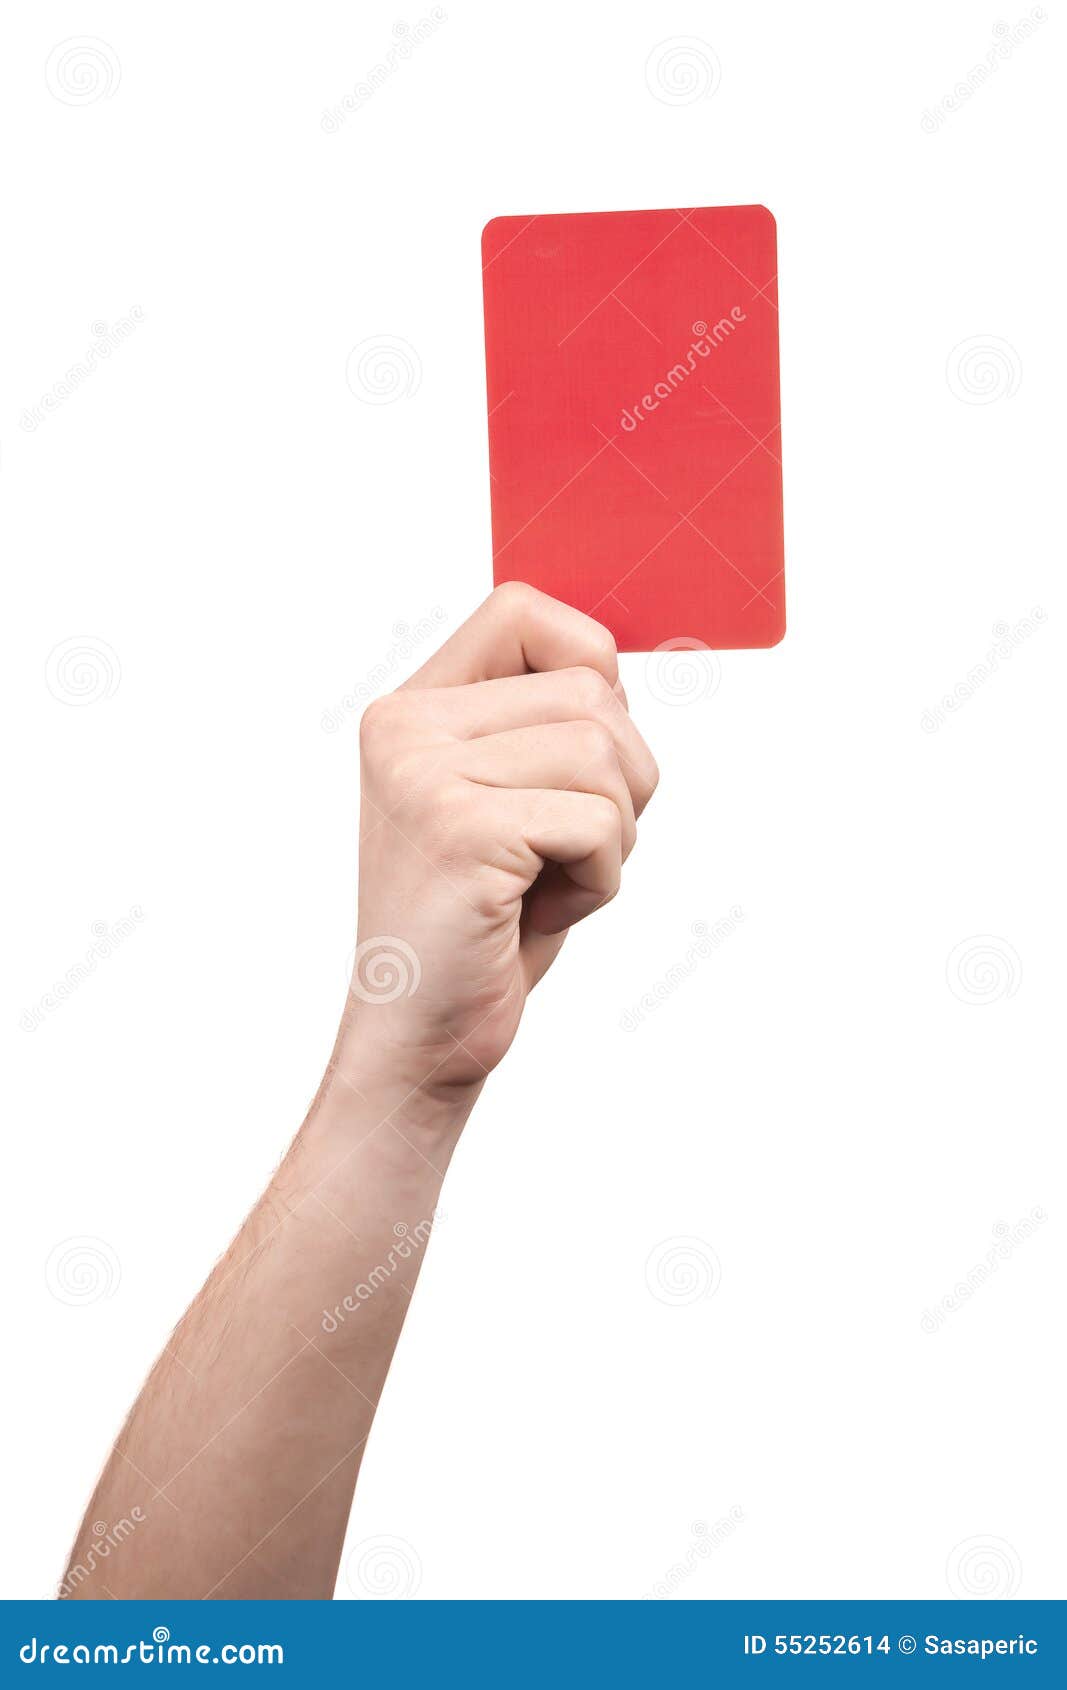 Soccer Referee Hand Holding Red Card Stock Photo - Image of